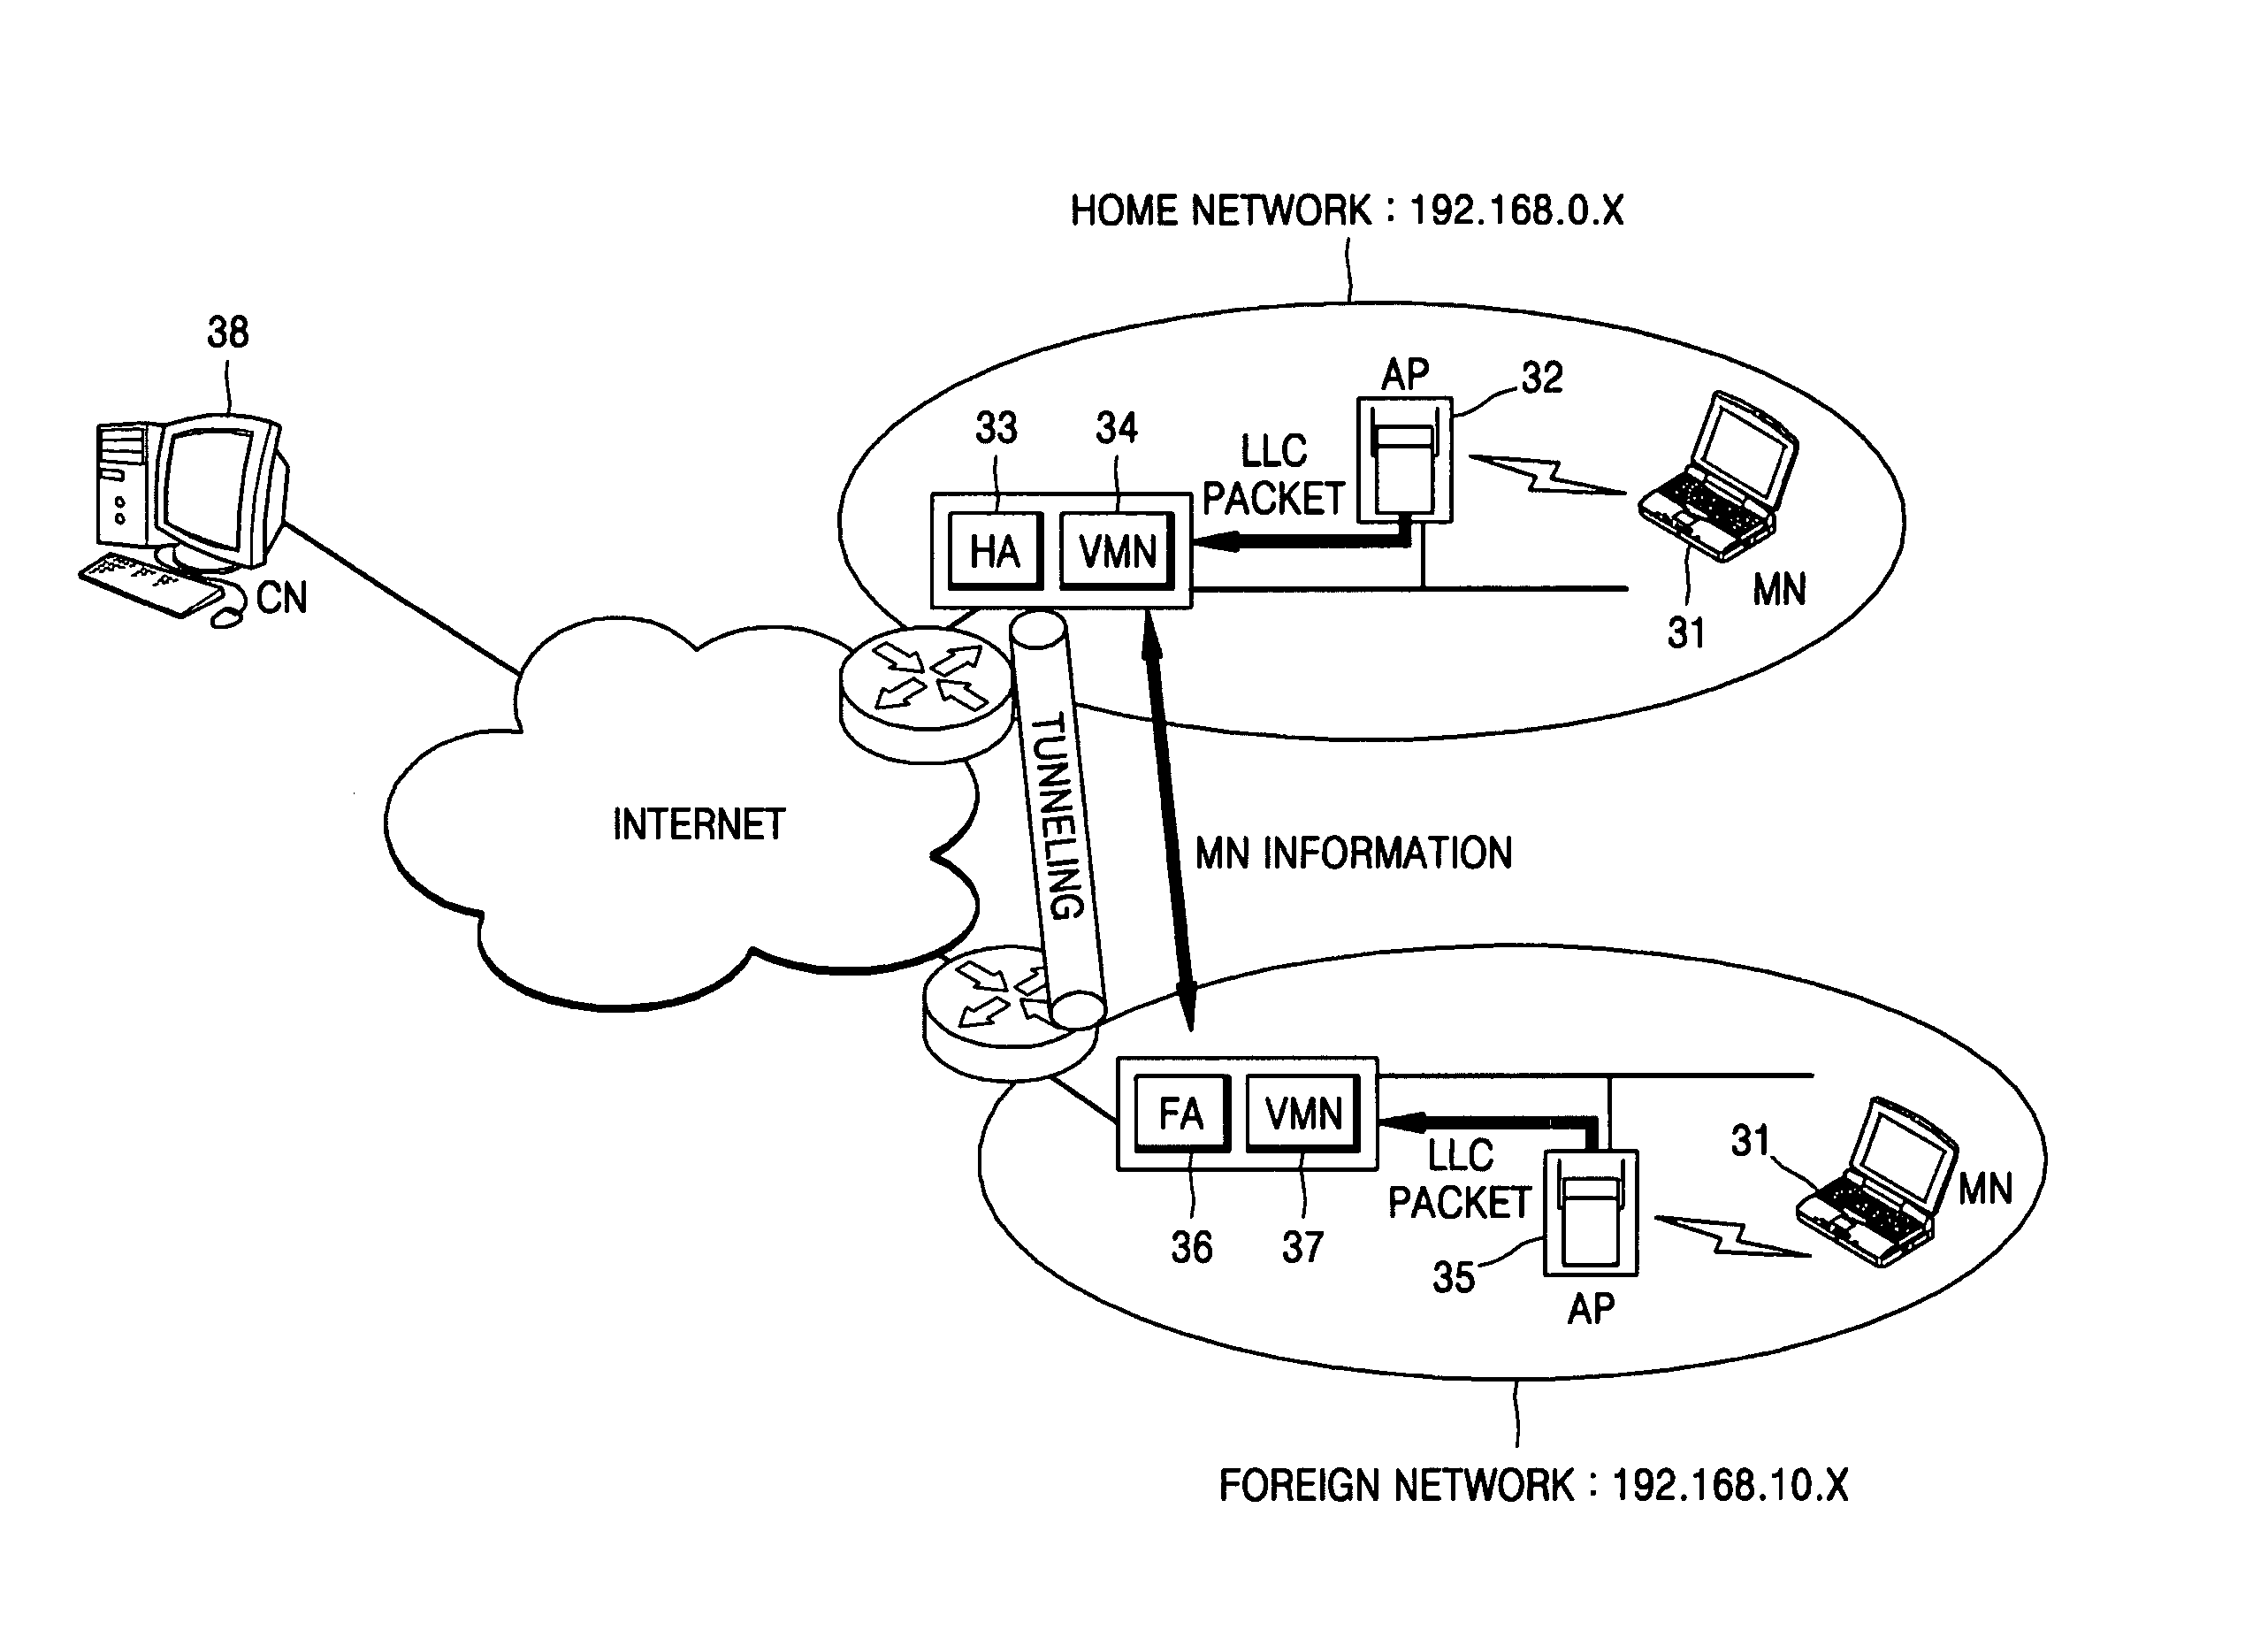 Method and apparatus for registering mobile node in a wireless local area network (LAN) environment